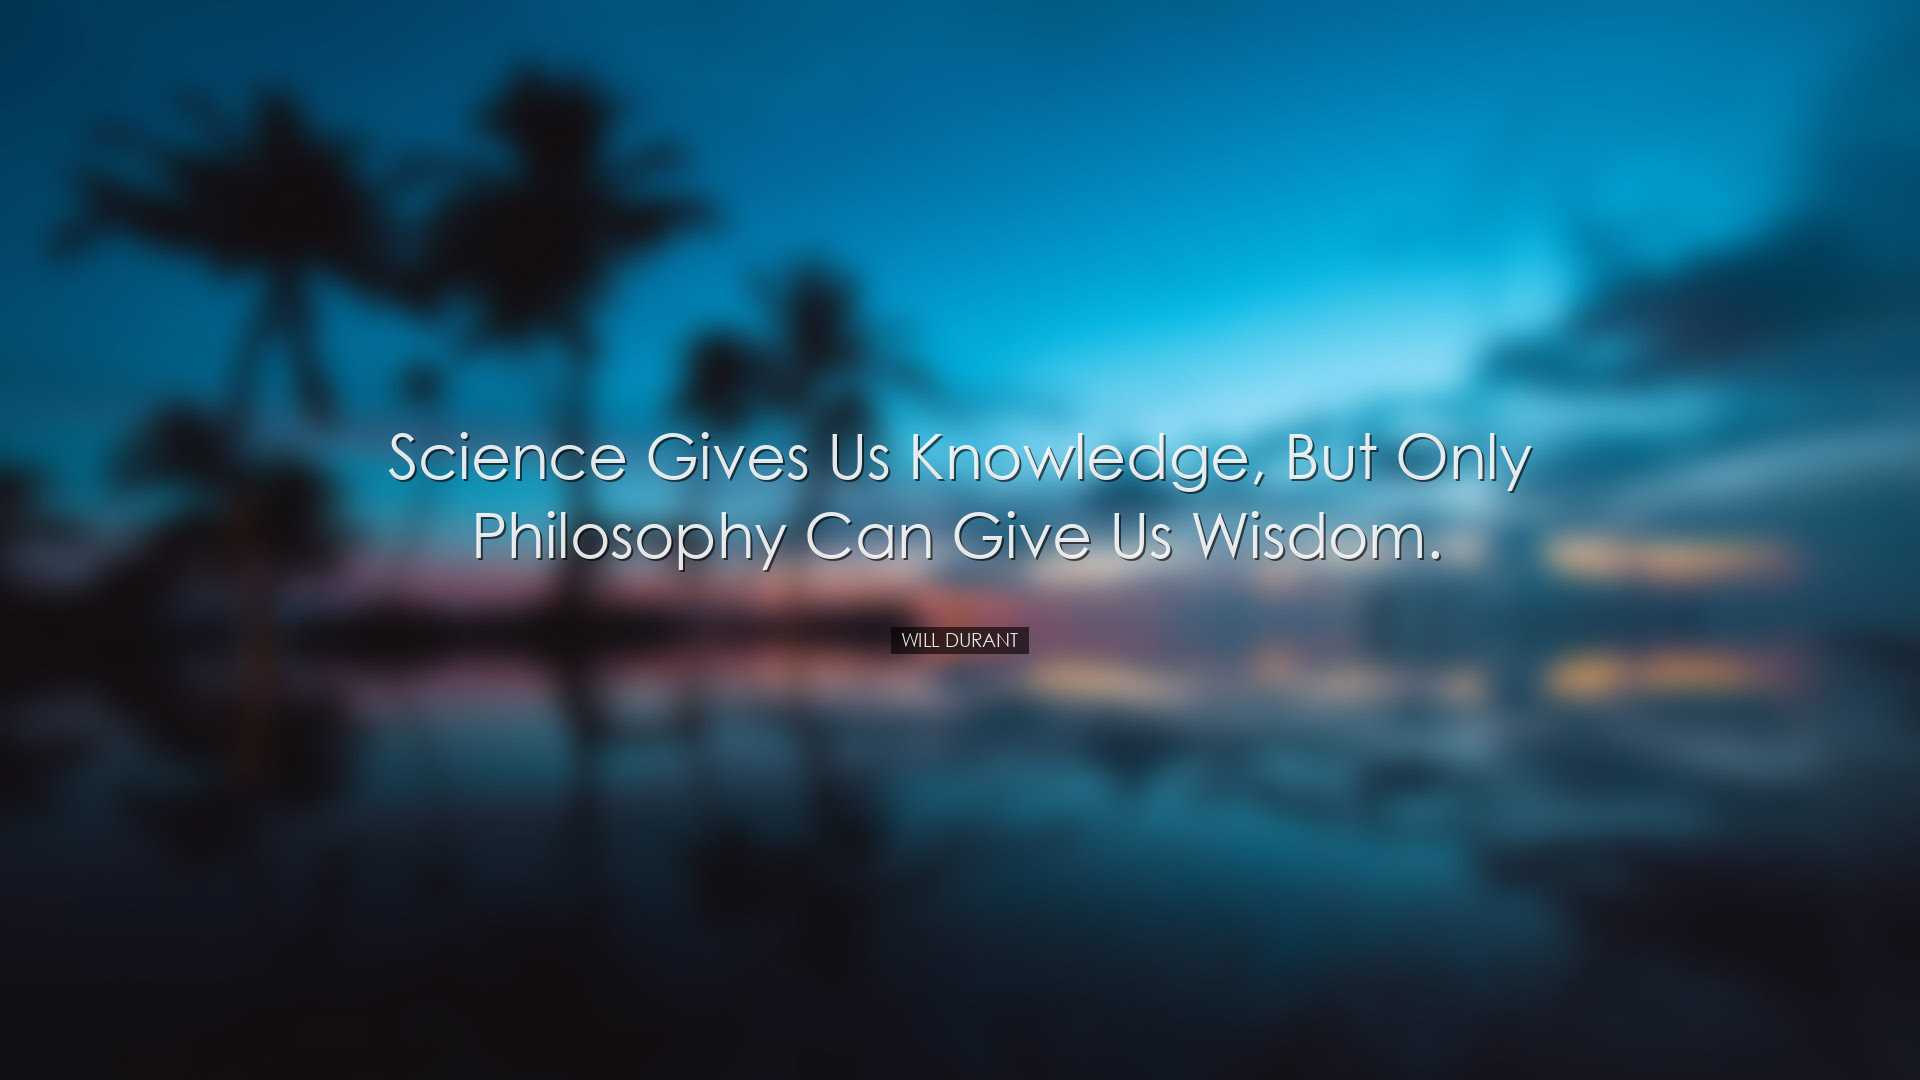 Science gives us knowledge, but only philosophy can give us wisdom